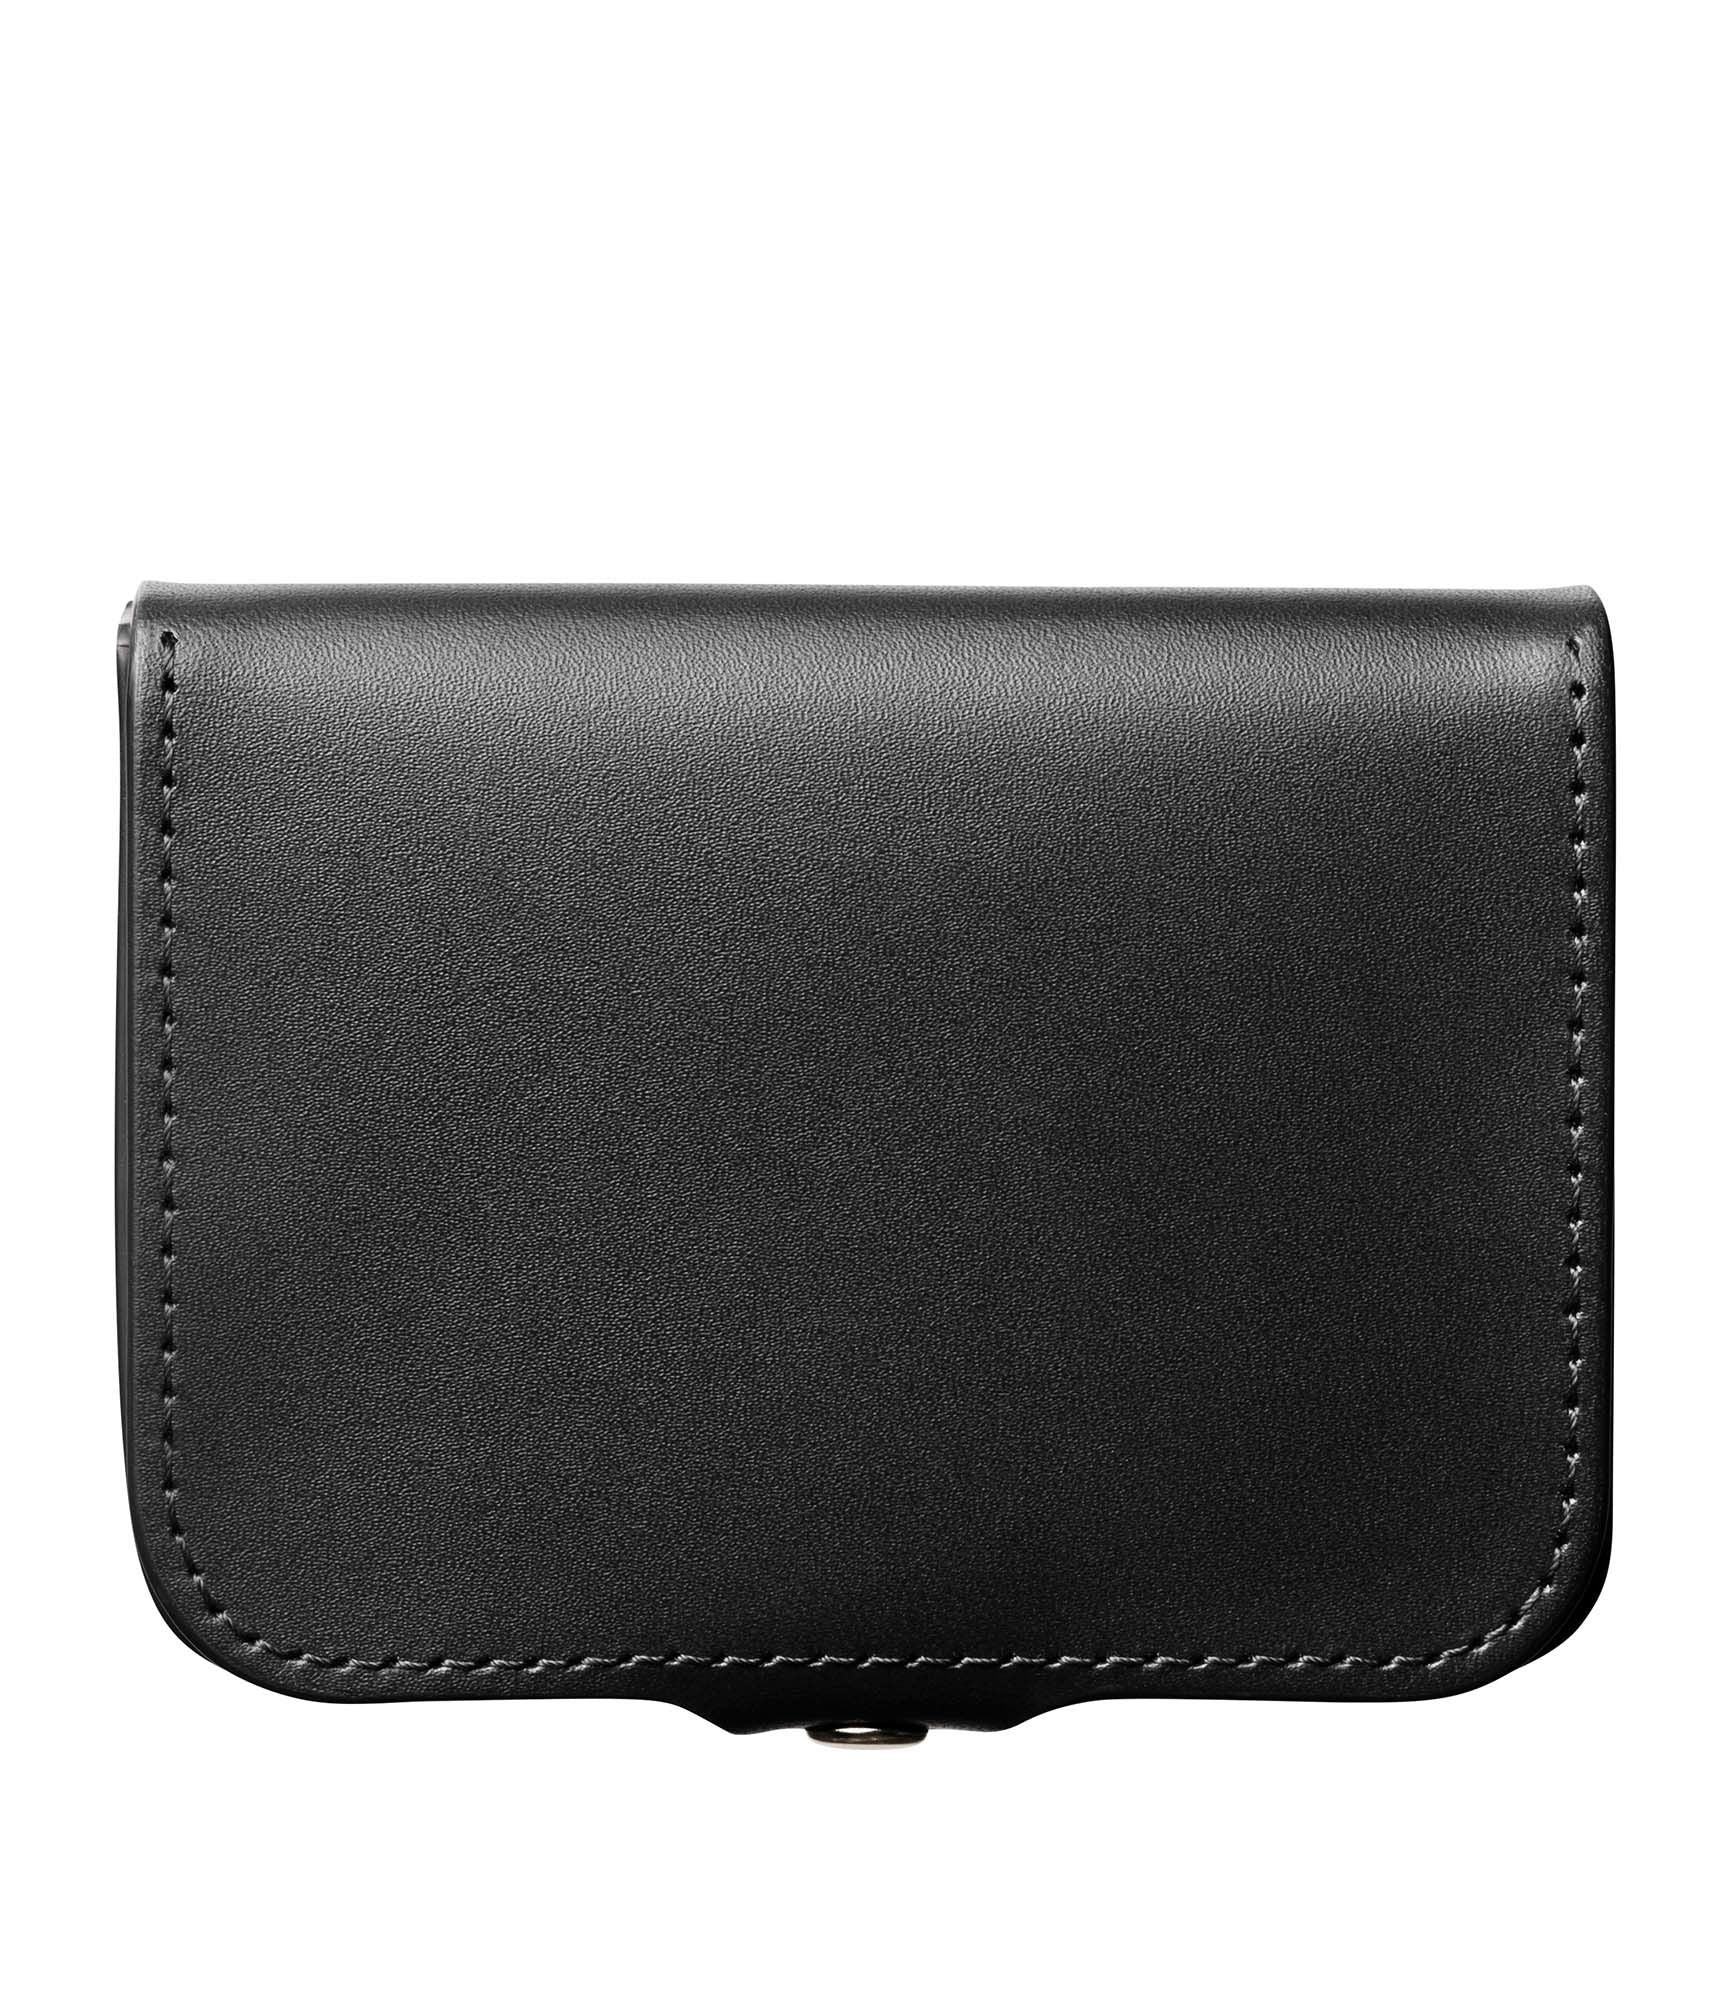 Josh coin purse - Smooth vegetable-tanned leather | A.P.C. Accessories